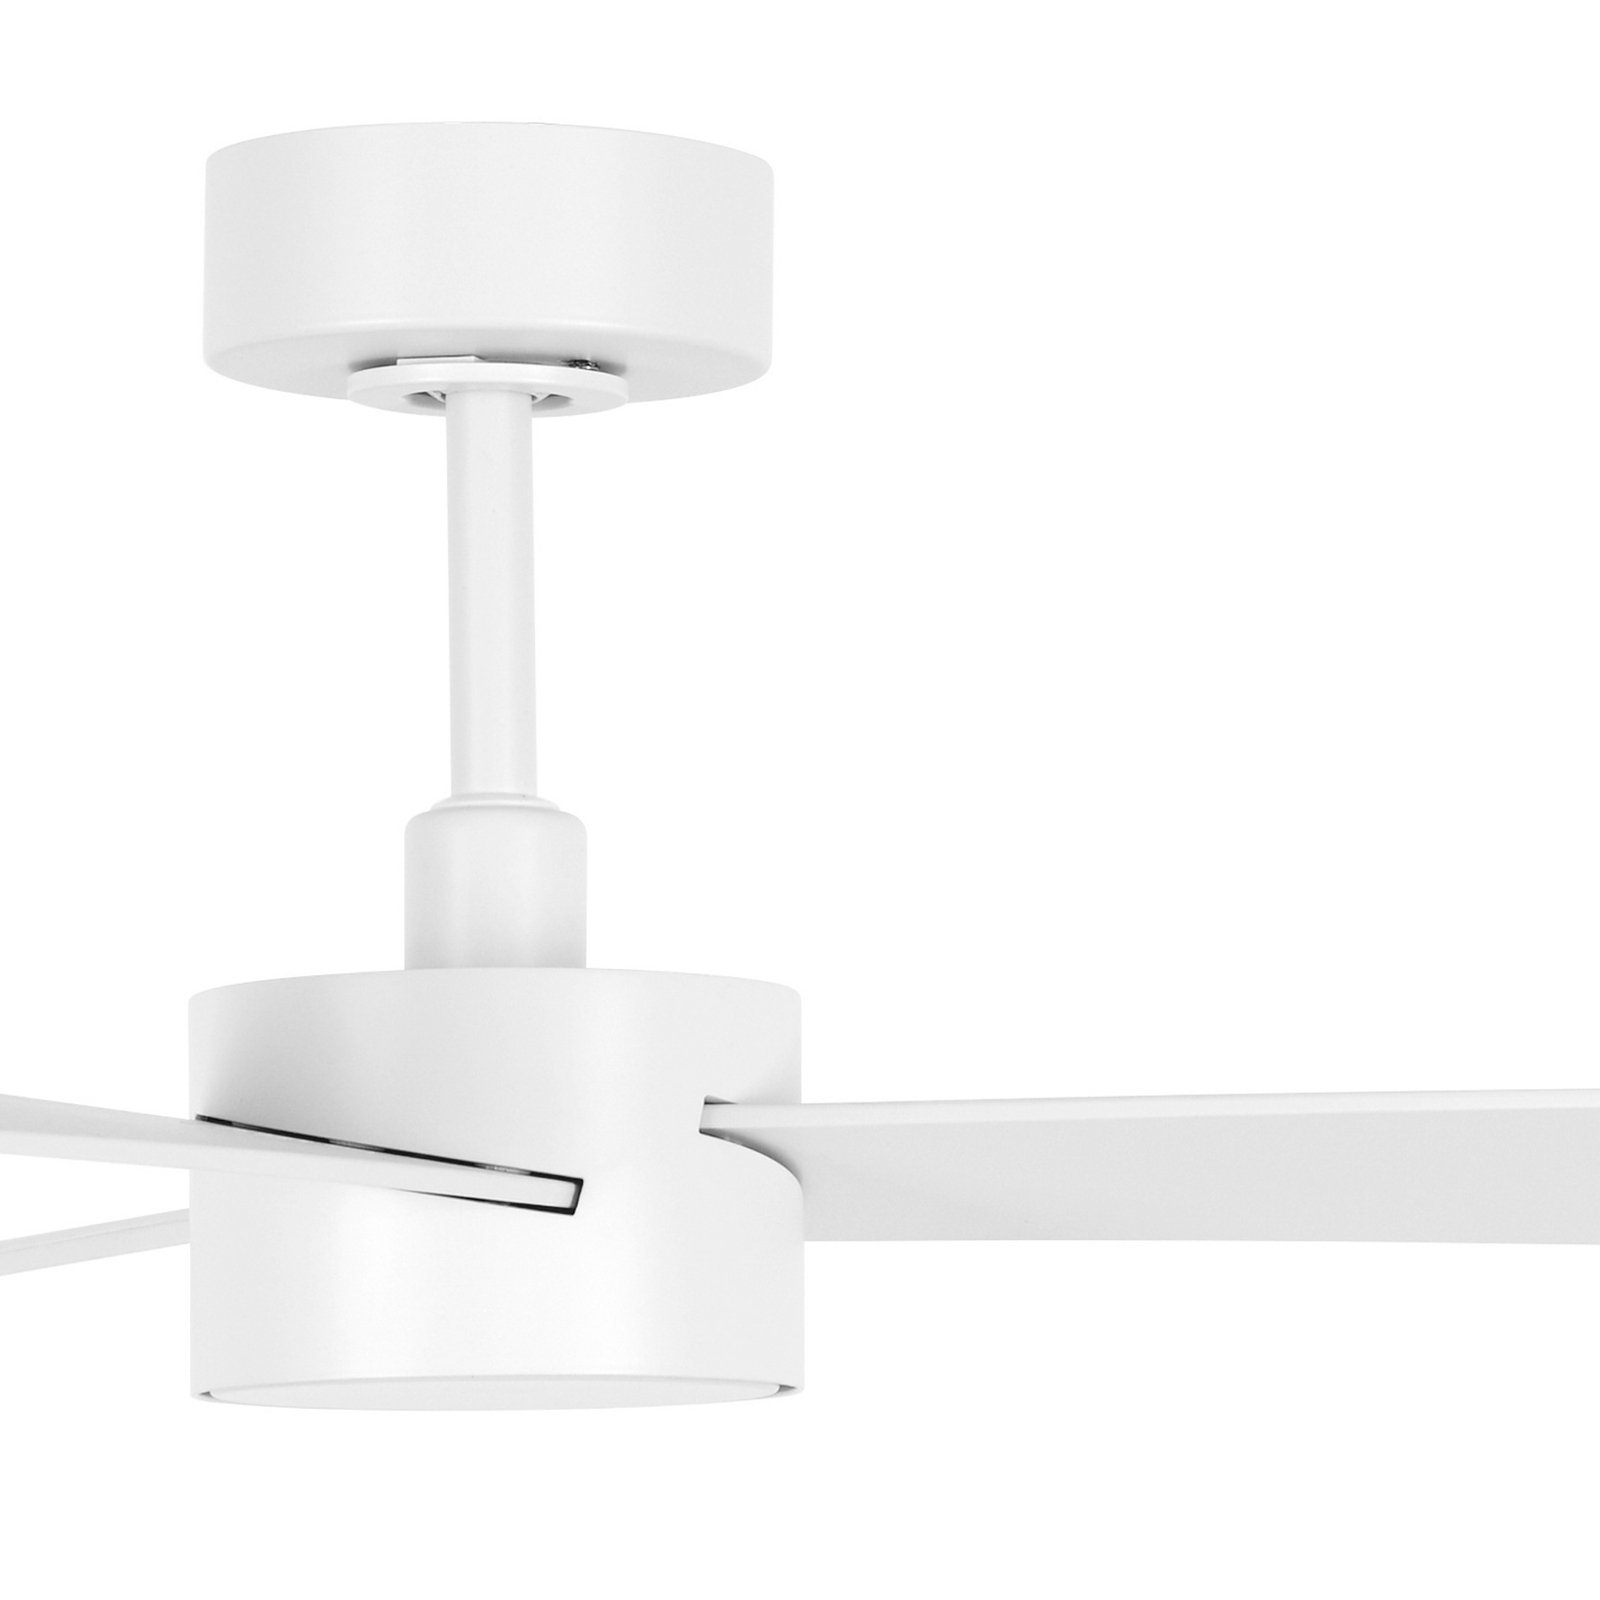 Beacon ceiling fan with light Climate IV, white, quiet